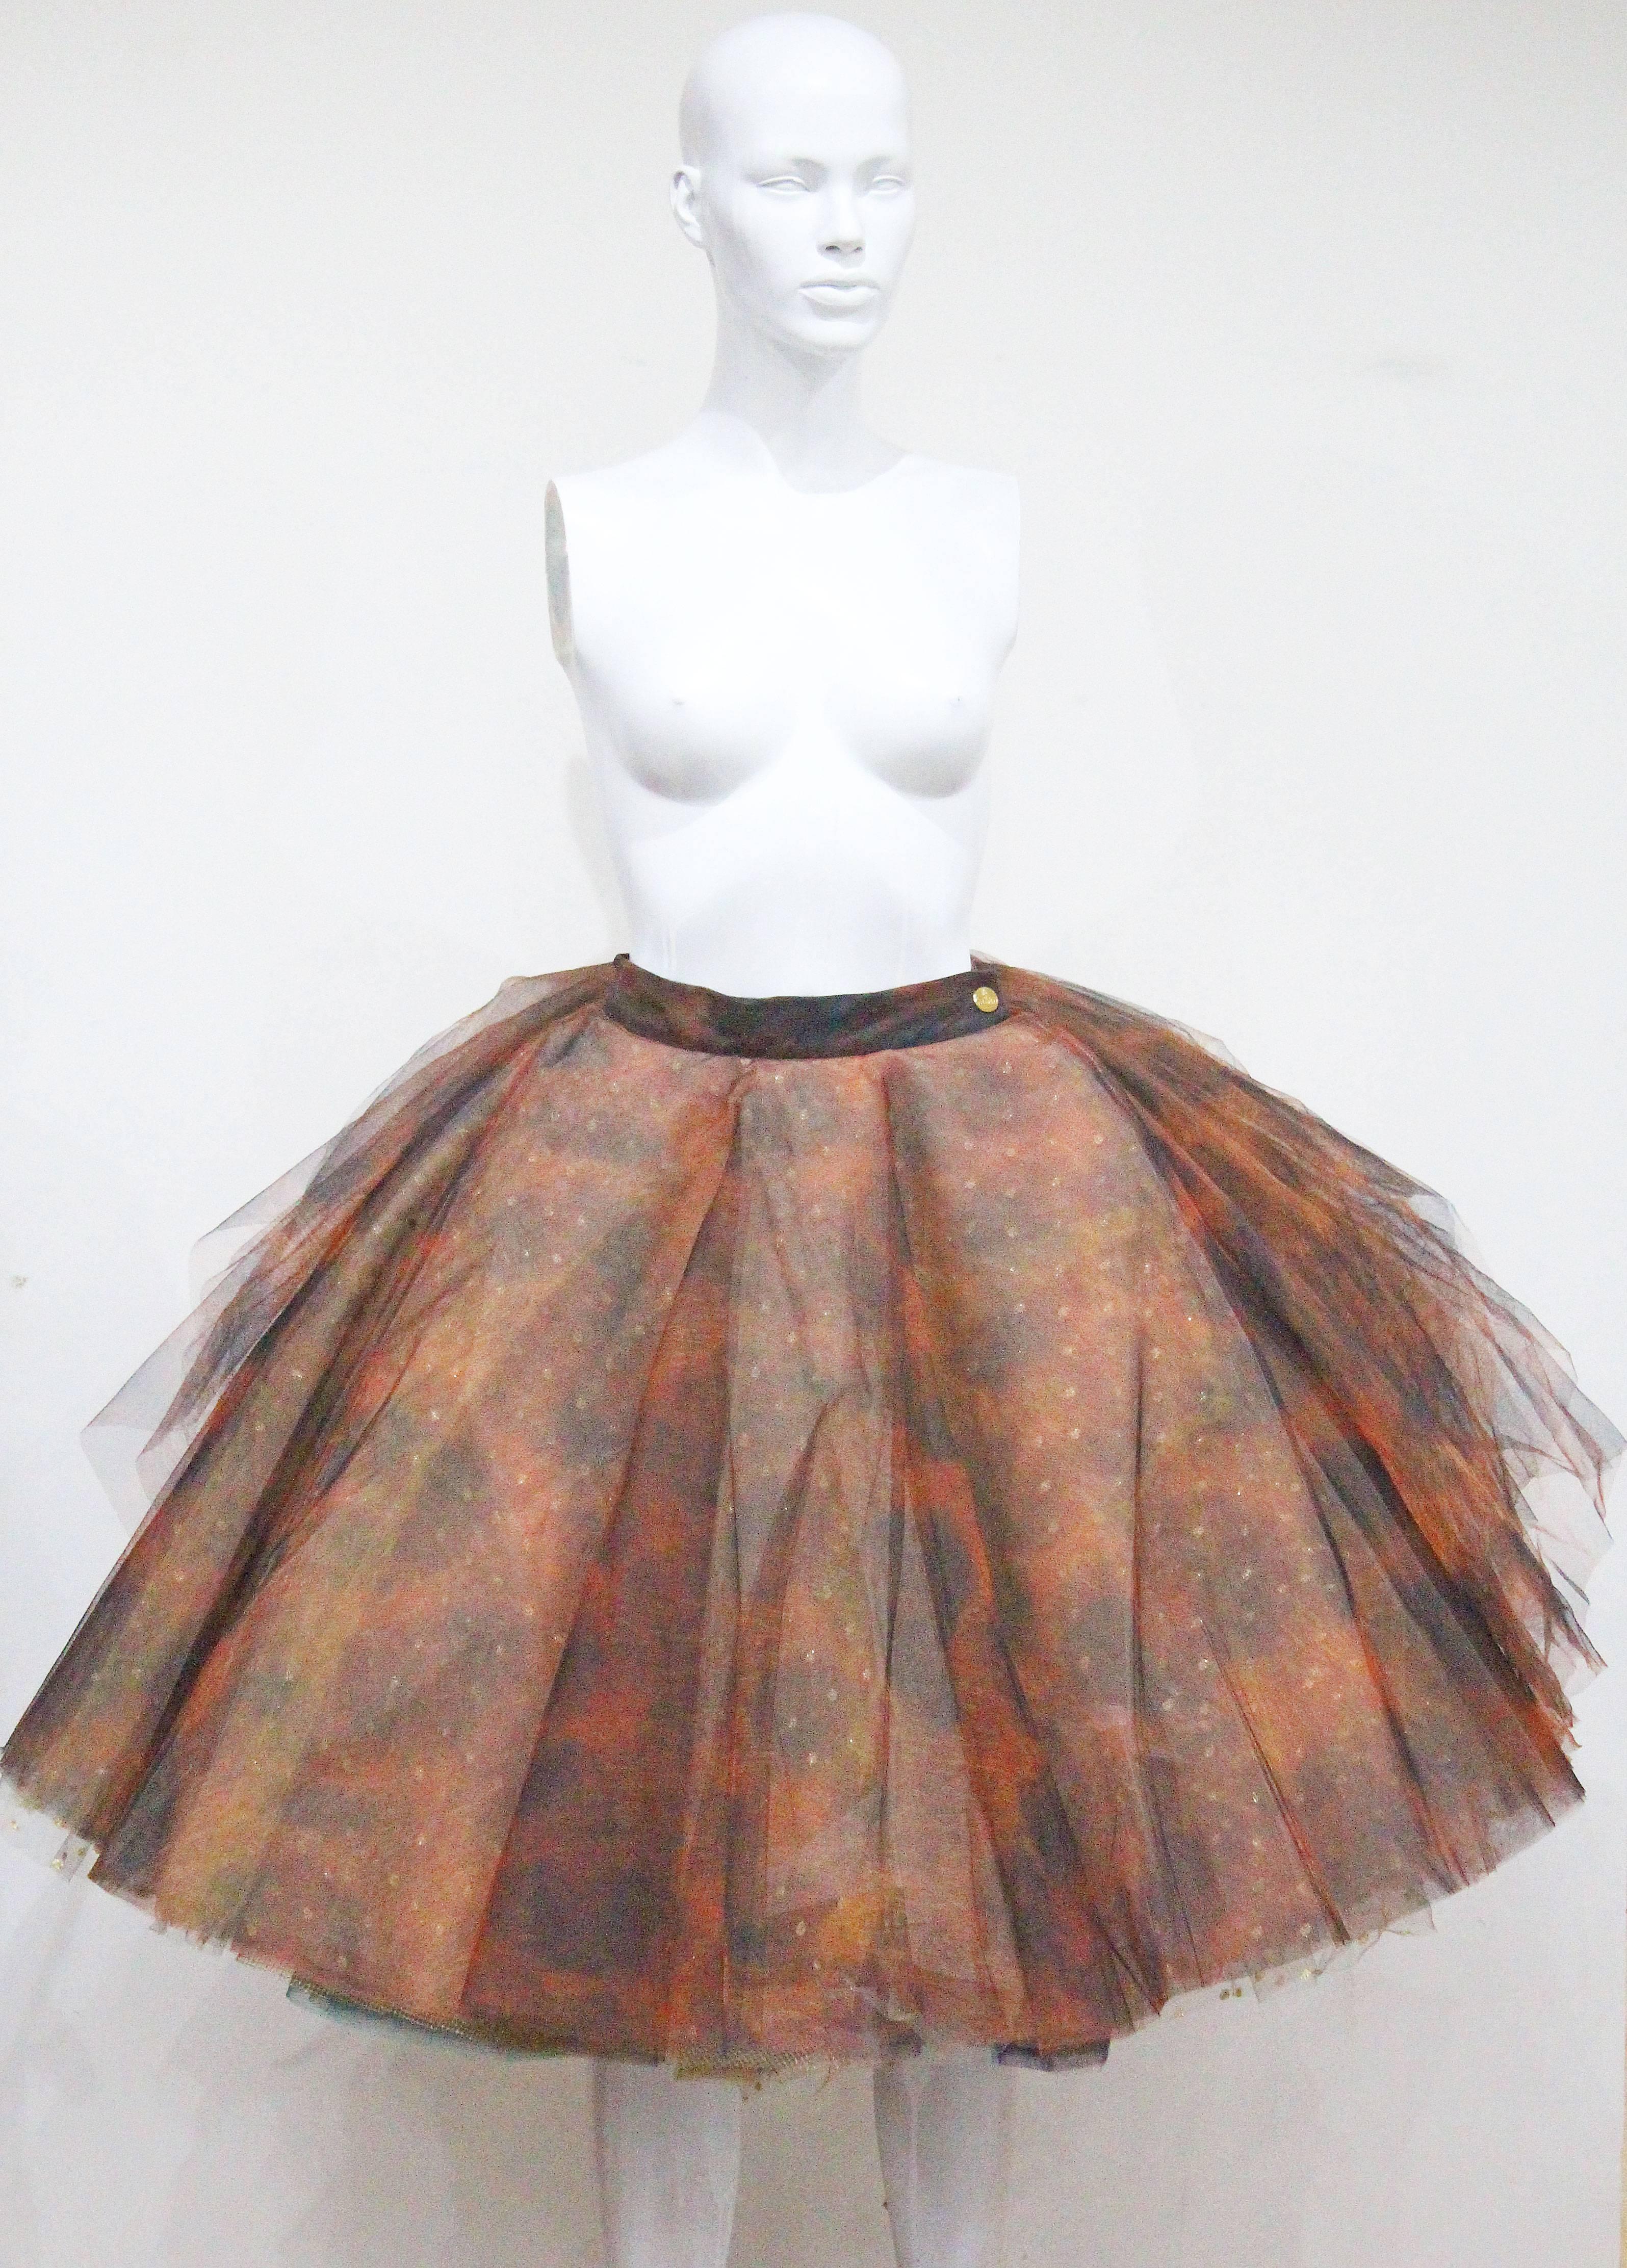 A museum worthy Vivienne Westwood tulle skirt from the year 1993. The skirt has various layers of netted tulle in a ray of colours and prints. The skirt lowers at the front gradually getting shorter towards the rear leaving the layers fully exposed